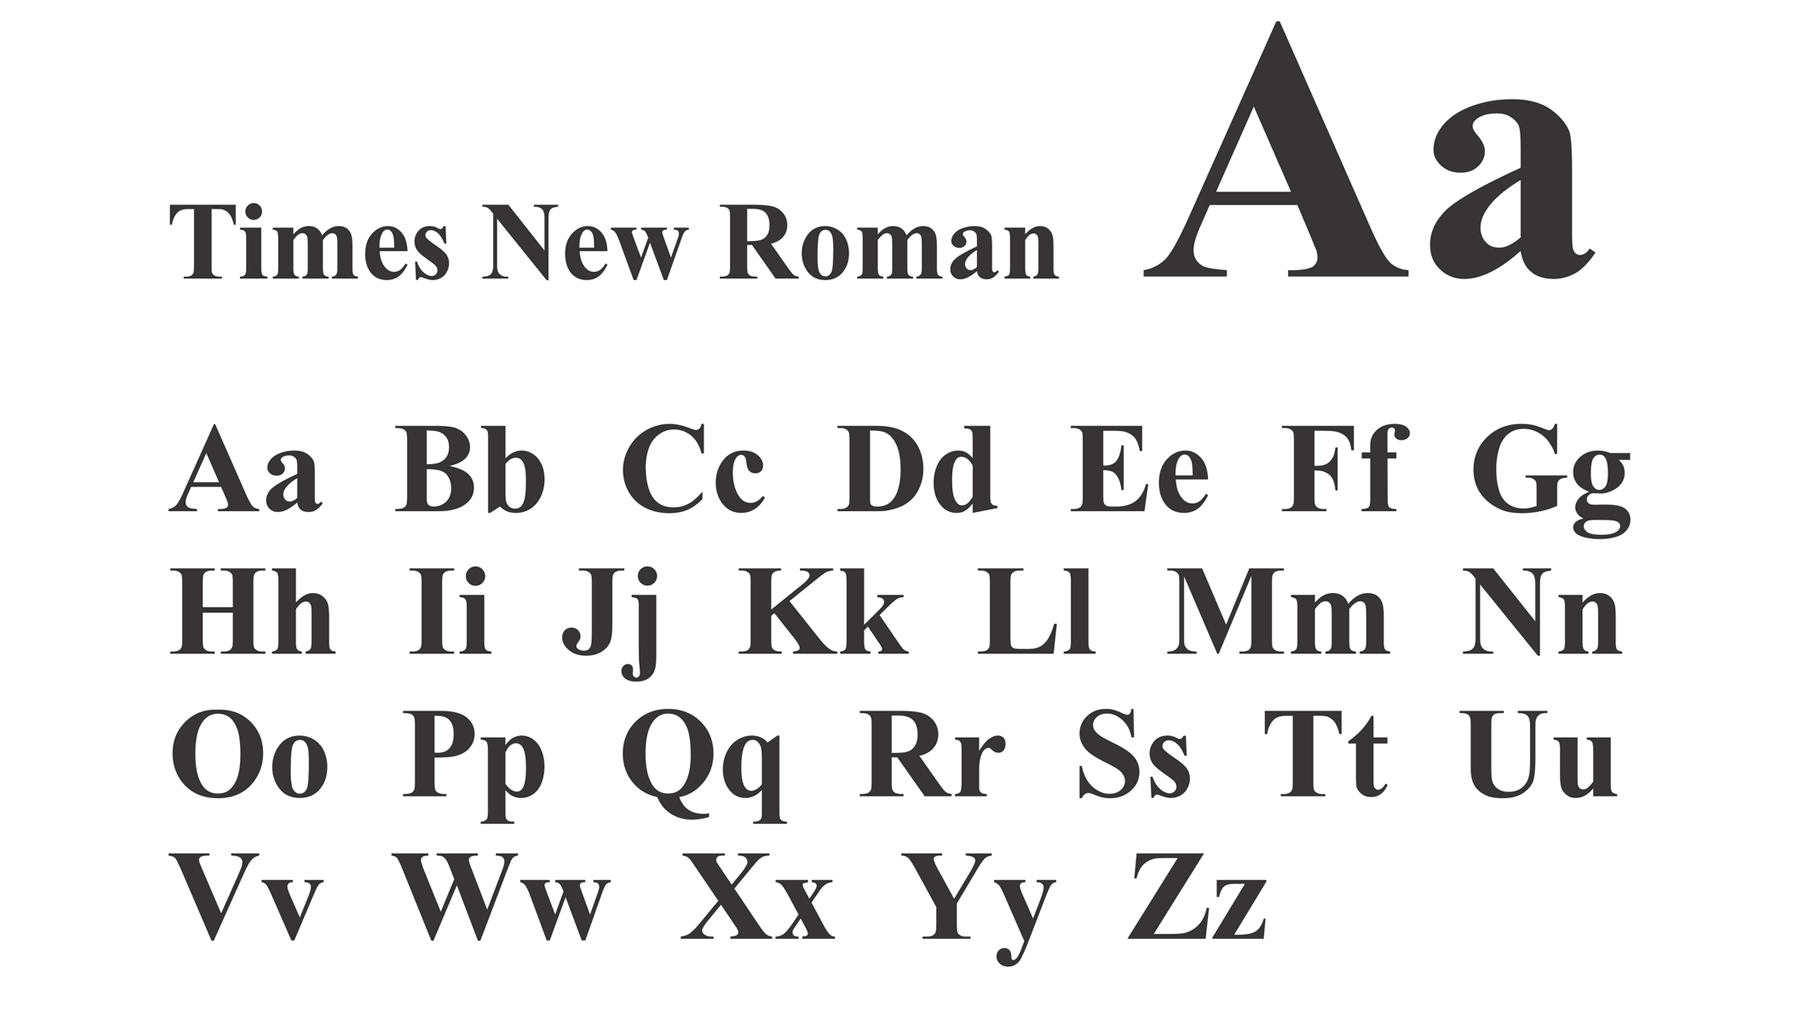 Шрифты times New Roman и arial